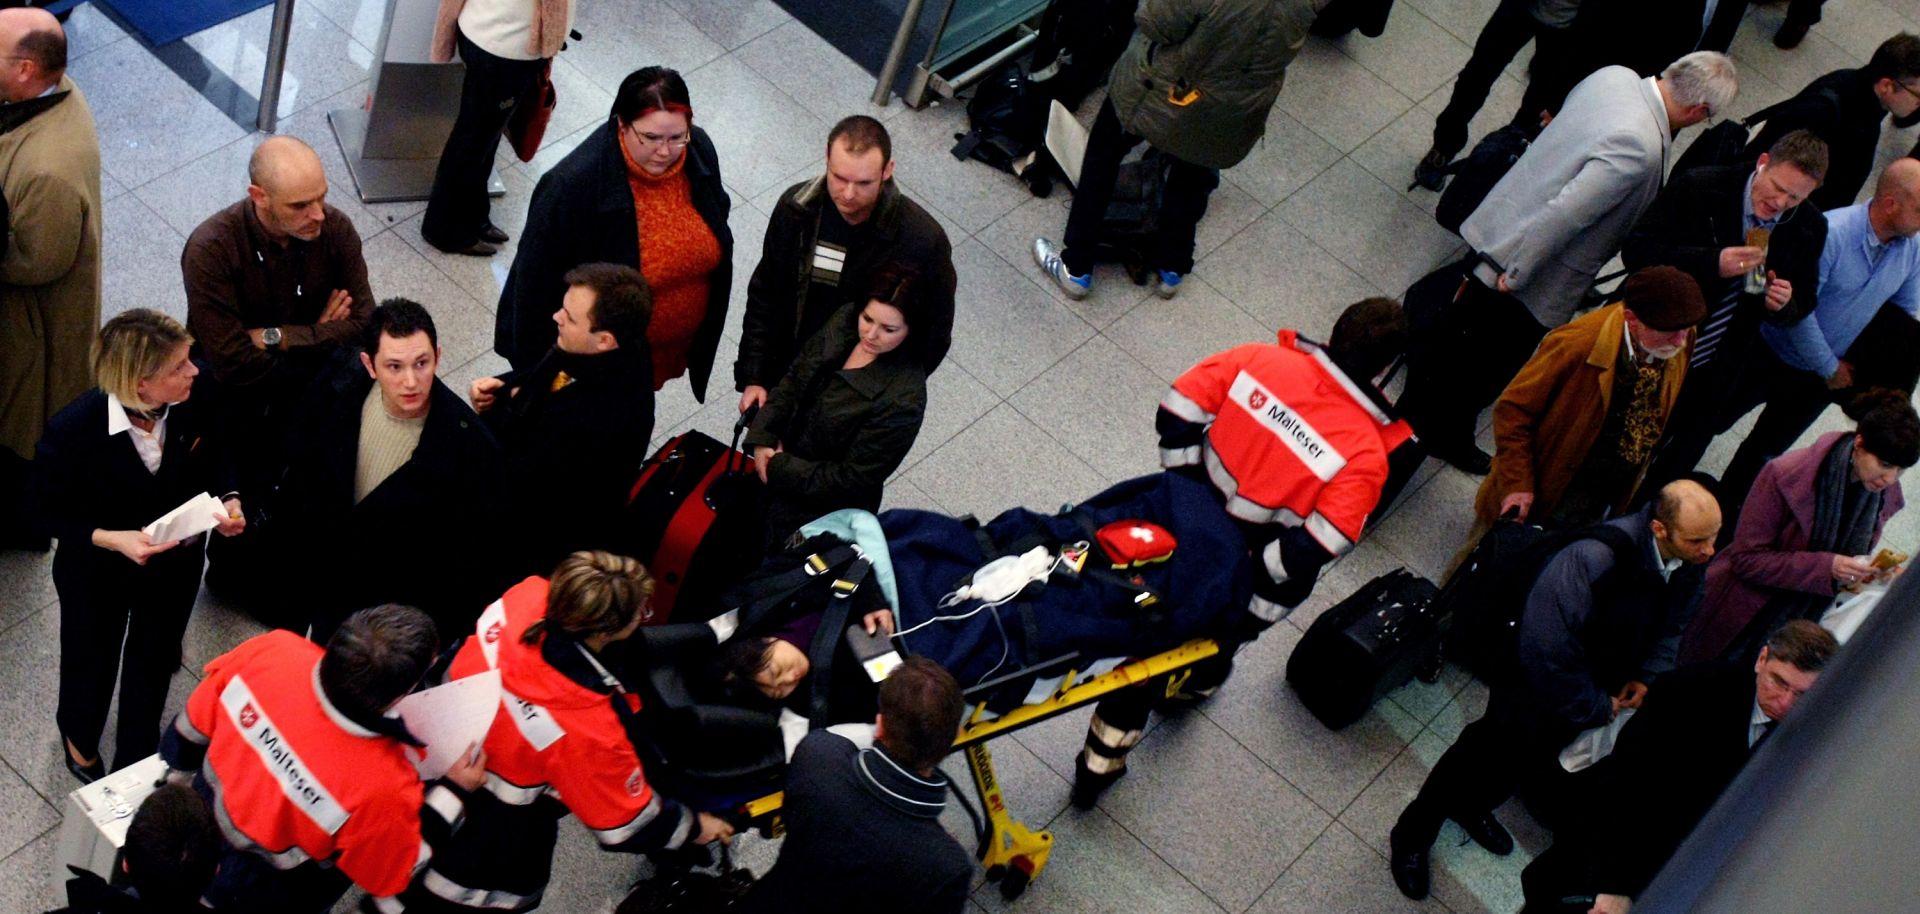 Rescue helper carries out a woman on a stretcher after a bomb alter at terminal 2 on the Munich airport.